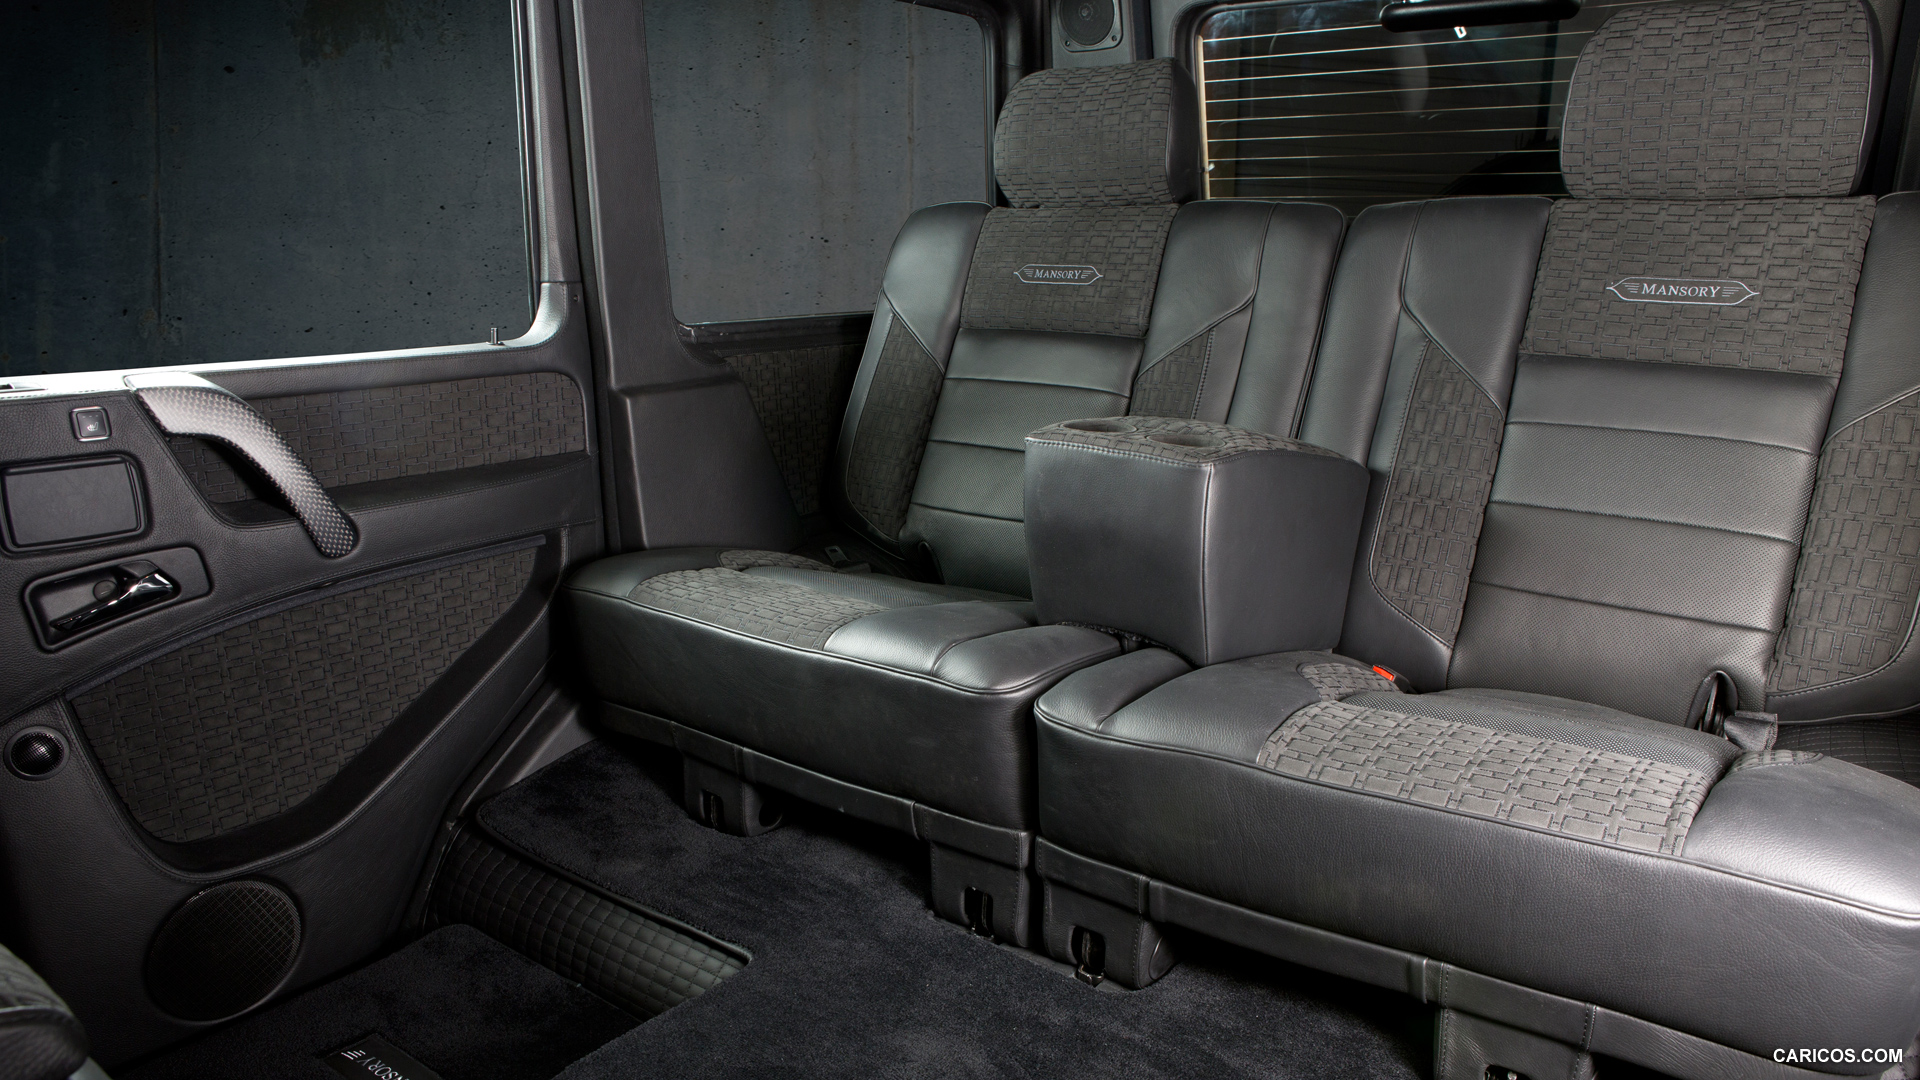 14 Mansory Gronos Based On Mercedes Benz G Class Amg Interior Rear Seats Caricos